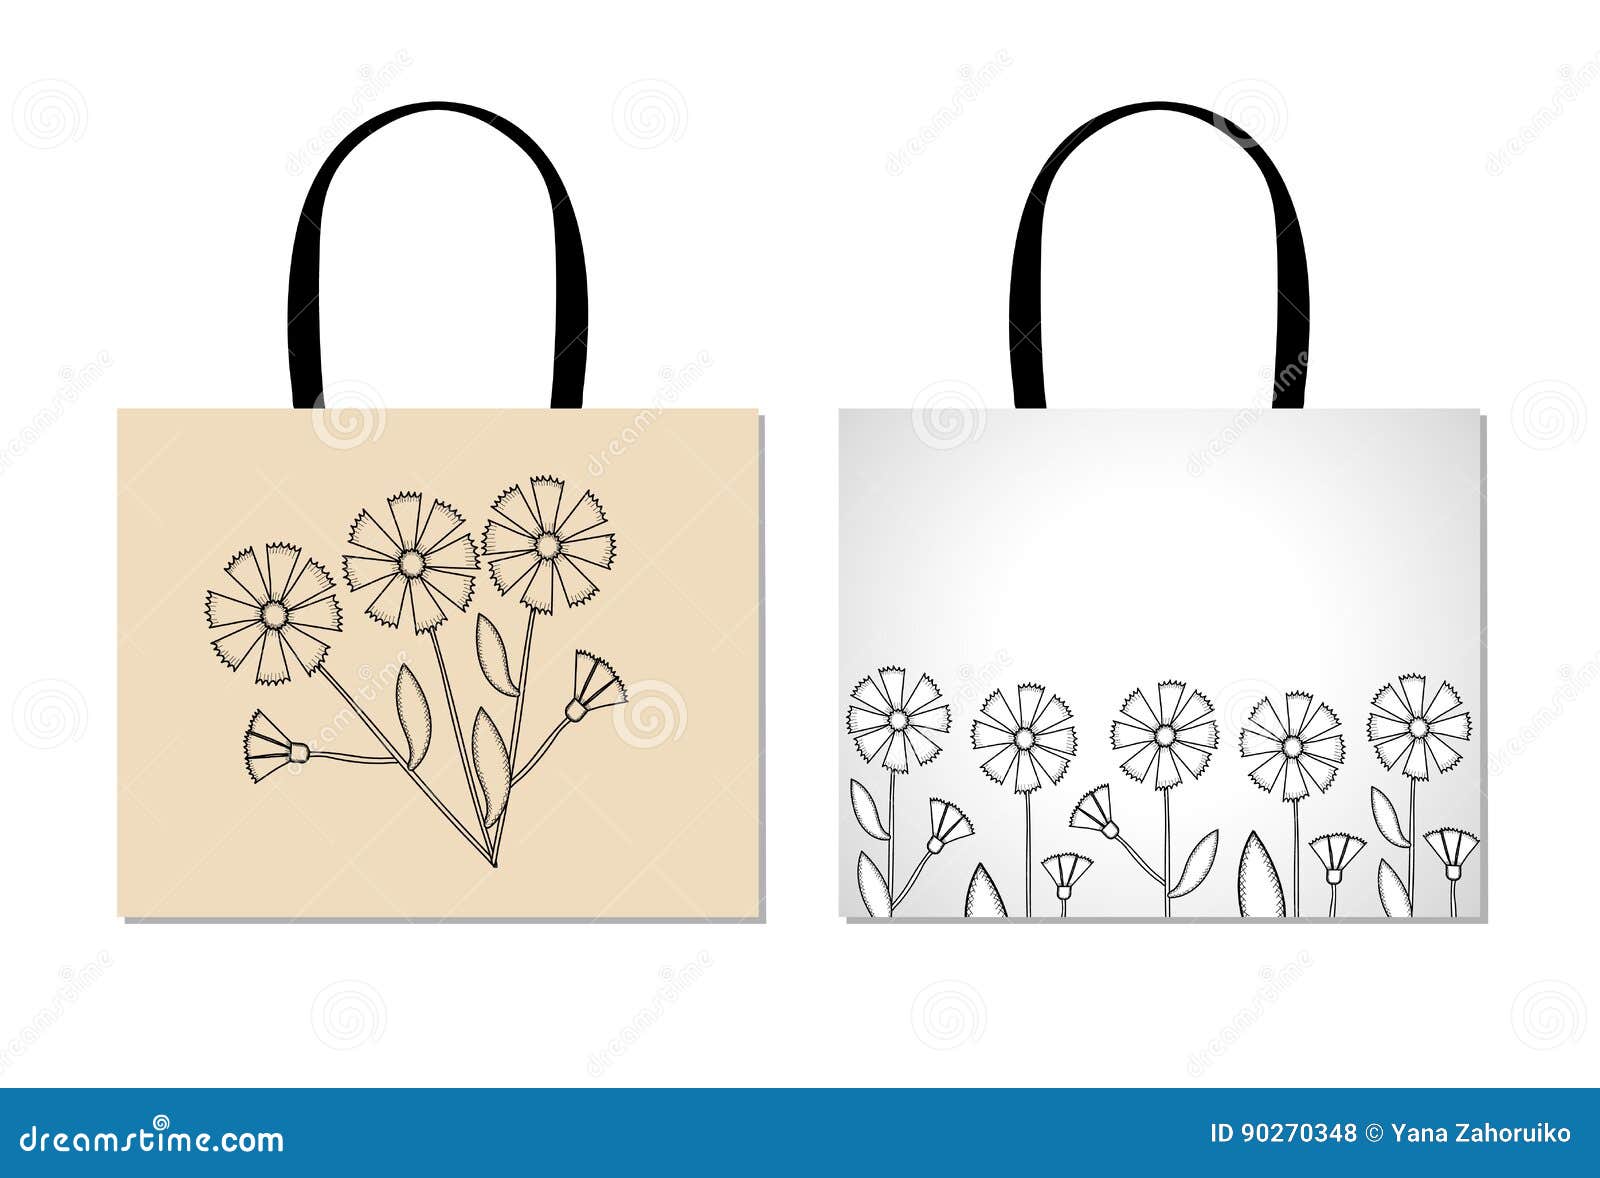 Shopping Bag Design Template With Creative Black Flowers. Stock Vector - Illustration of ...